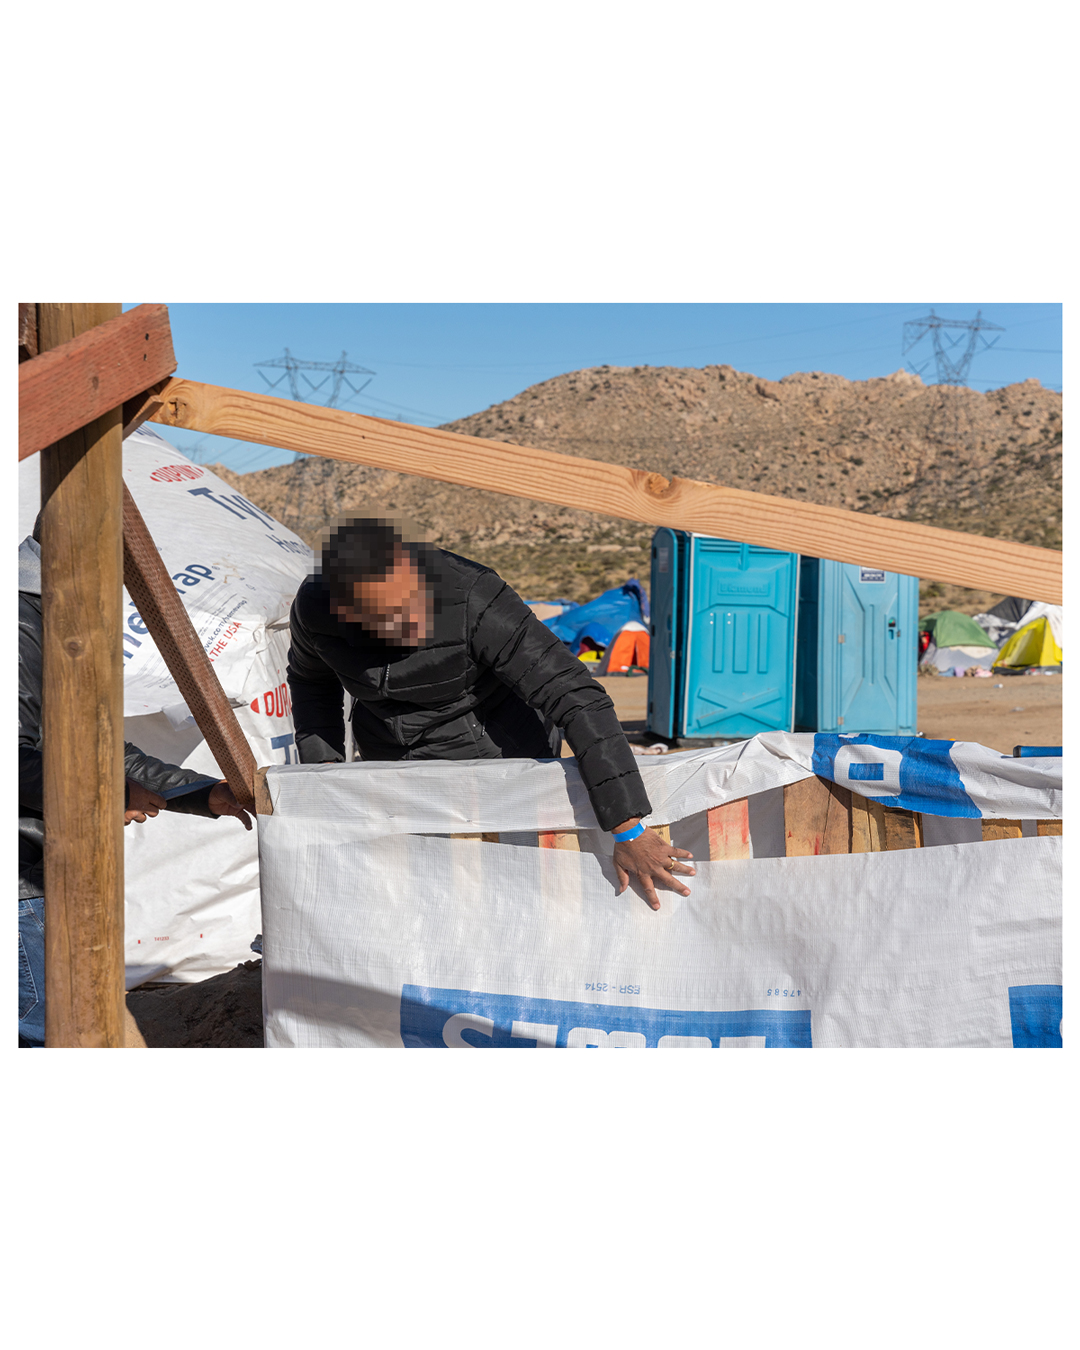 A man leans across the beams of a project in construction to examine a pallet of wood. Behind him are two port-a-potties, and behind that is an encampment of various tents and tarps. The little camp has been set up below a rocky hill; large power lines run across the background.